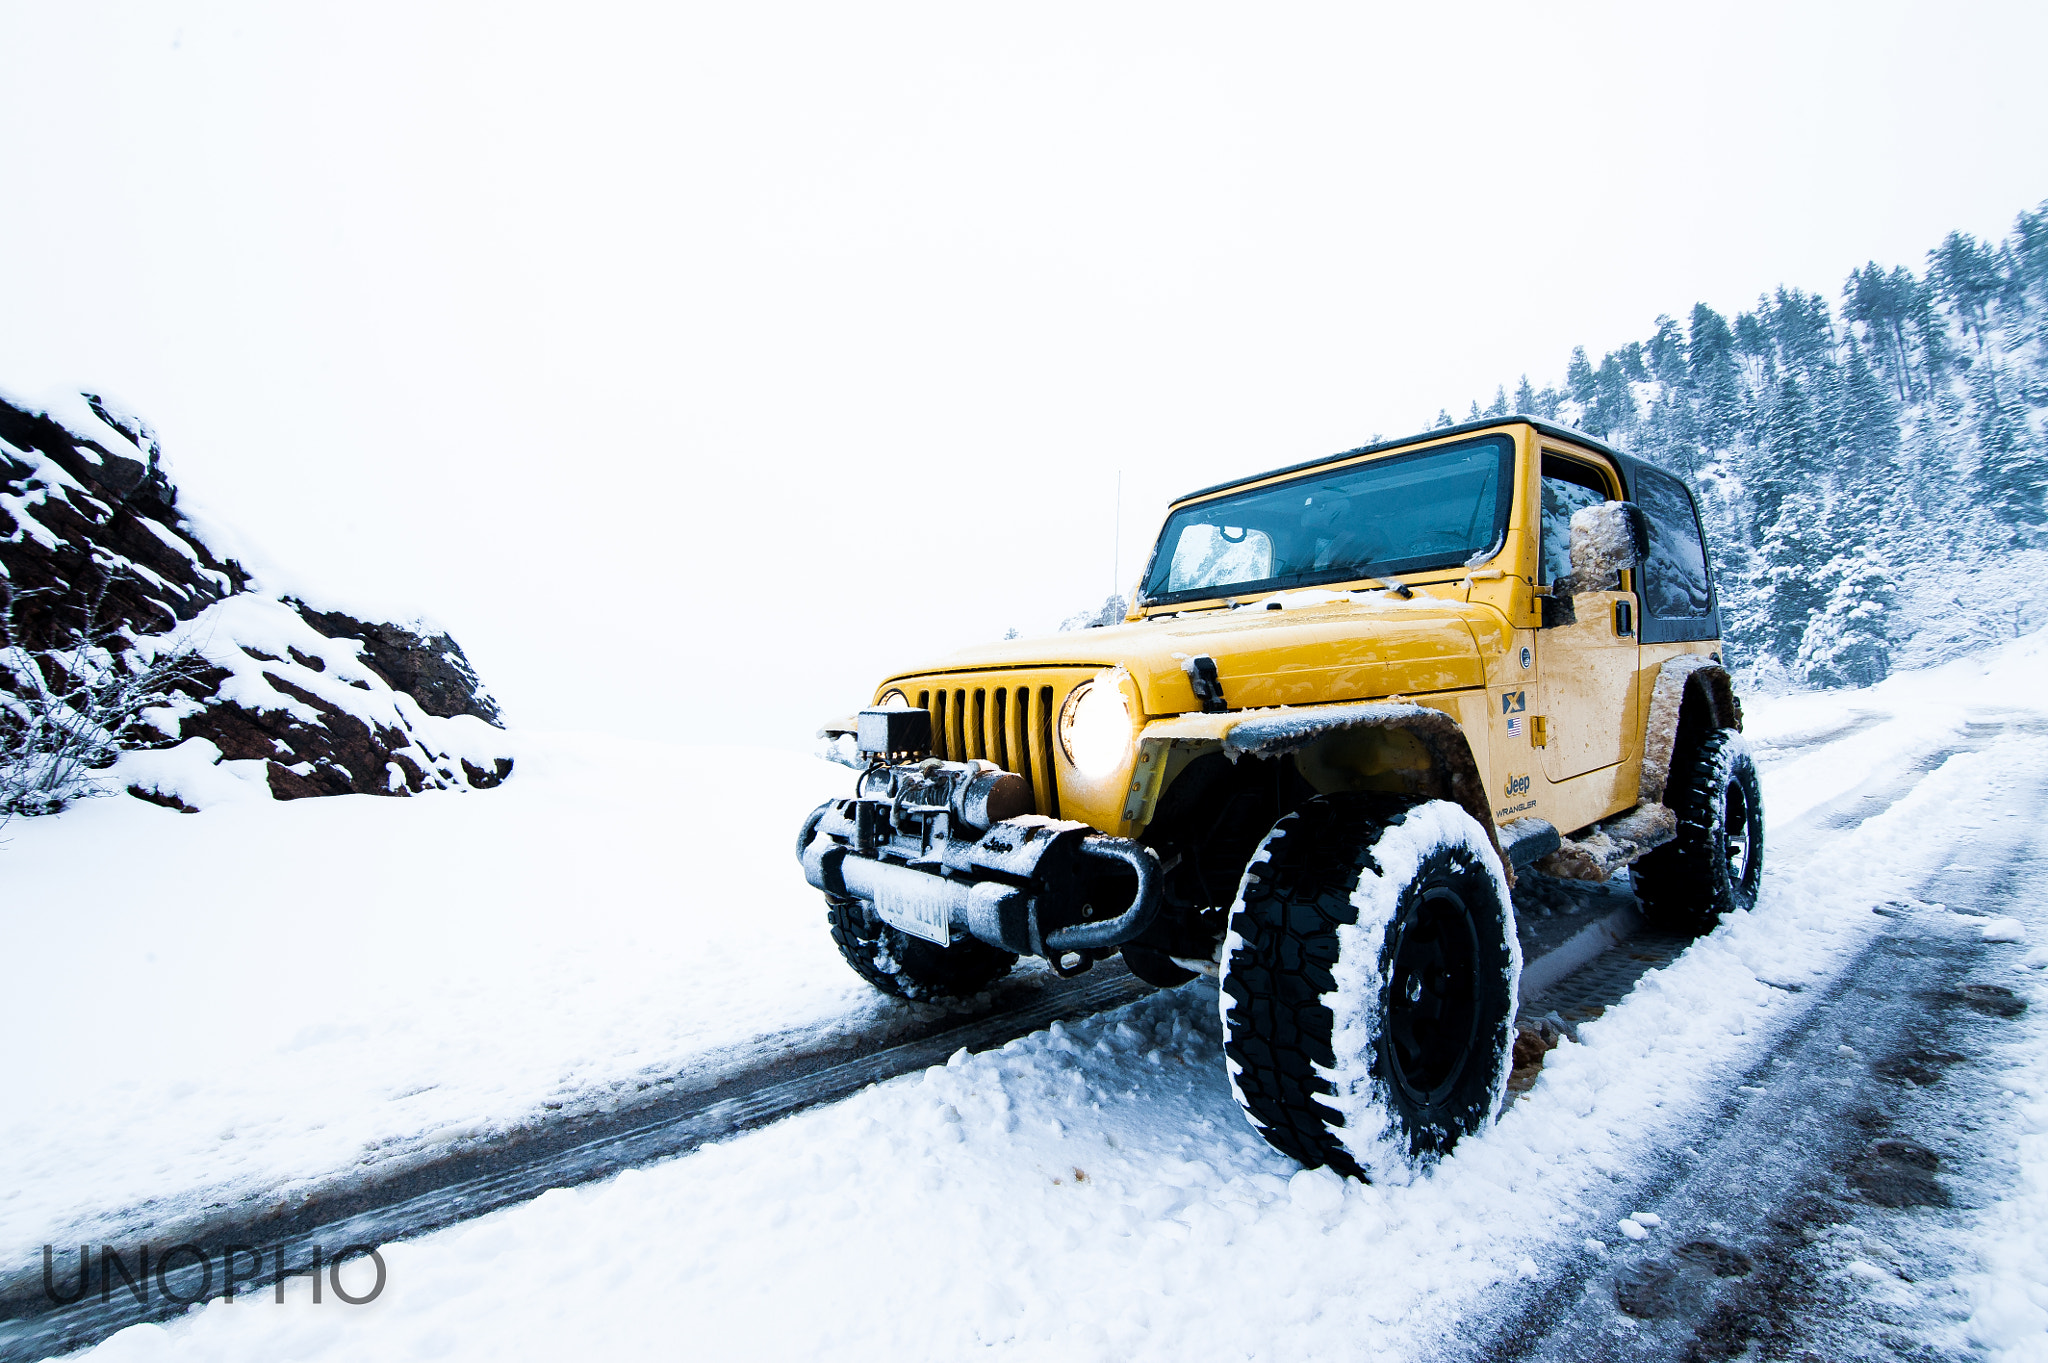 Nikon D700 + Tokina AT-X Pro 11-16mm F2.8 DX II sample photo. Jeep was meant for this photography